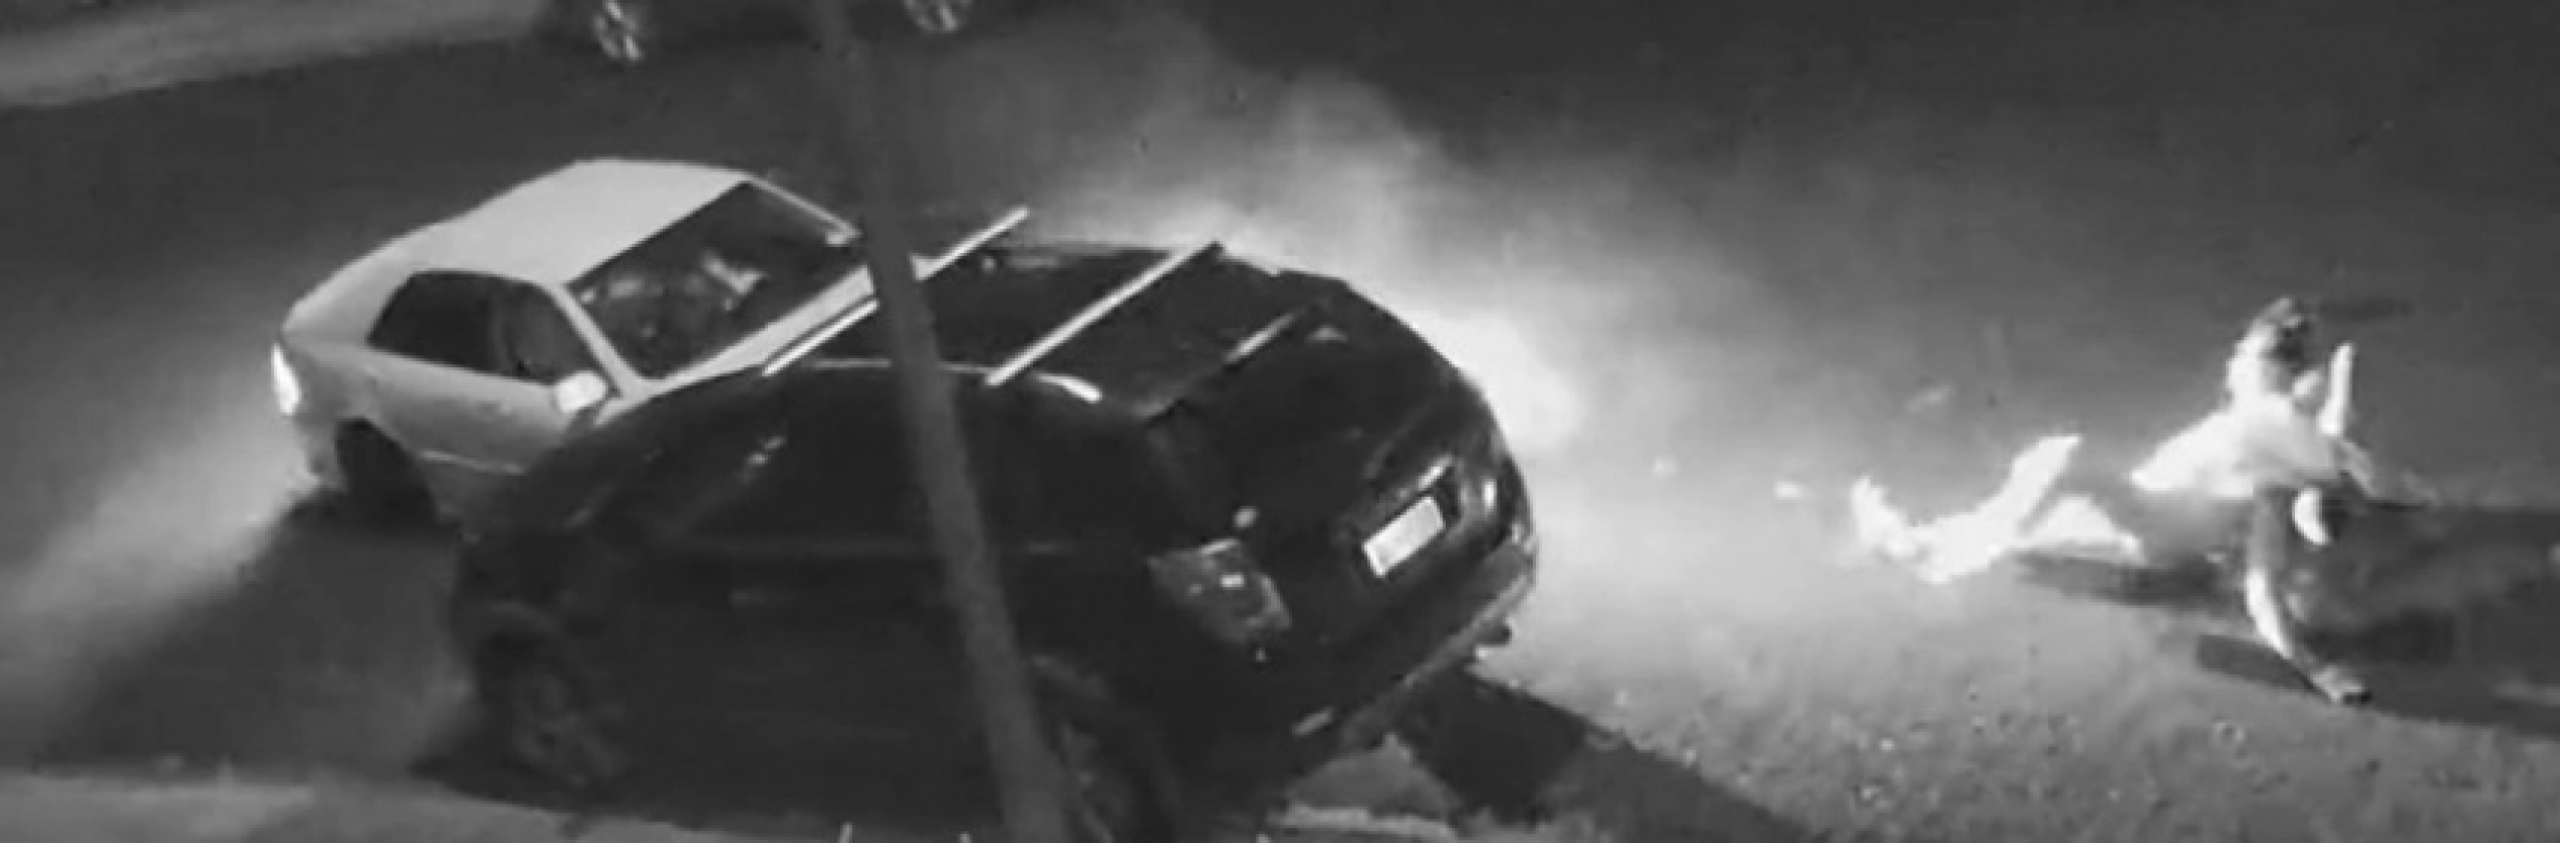 autos, cars, reviews, auckland central, car, cars, driven, driven nz, motoring, national, new zealand, news, nz, safety, video, video-news, watch: 'incredibly dangerous' car surfing goes stunt wrong in auckland